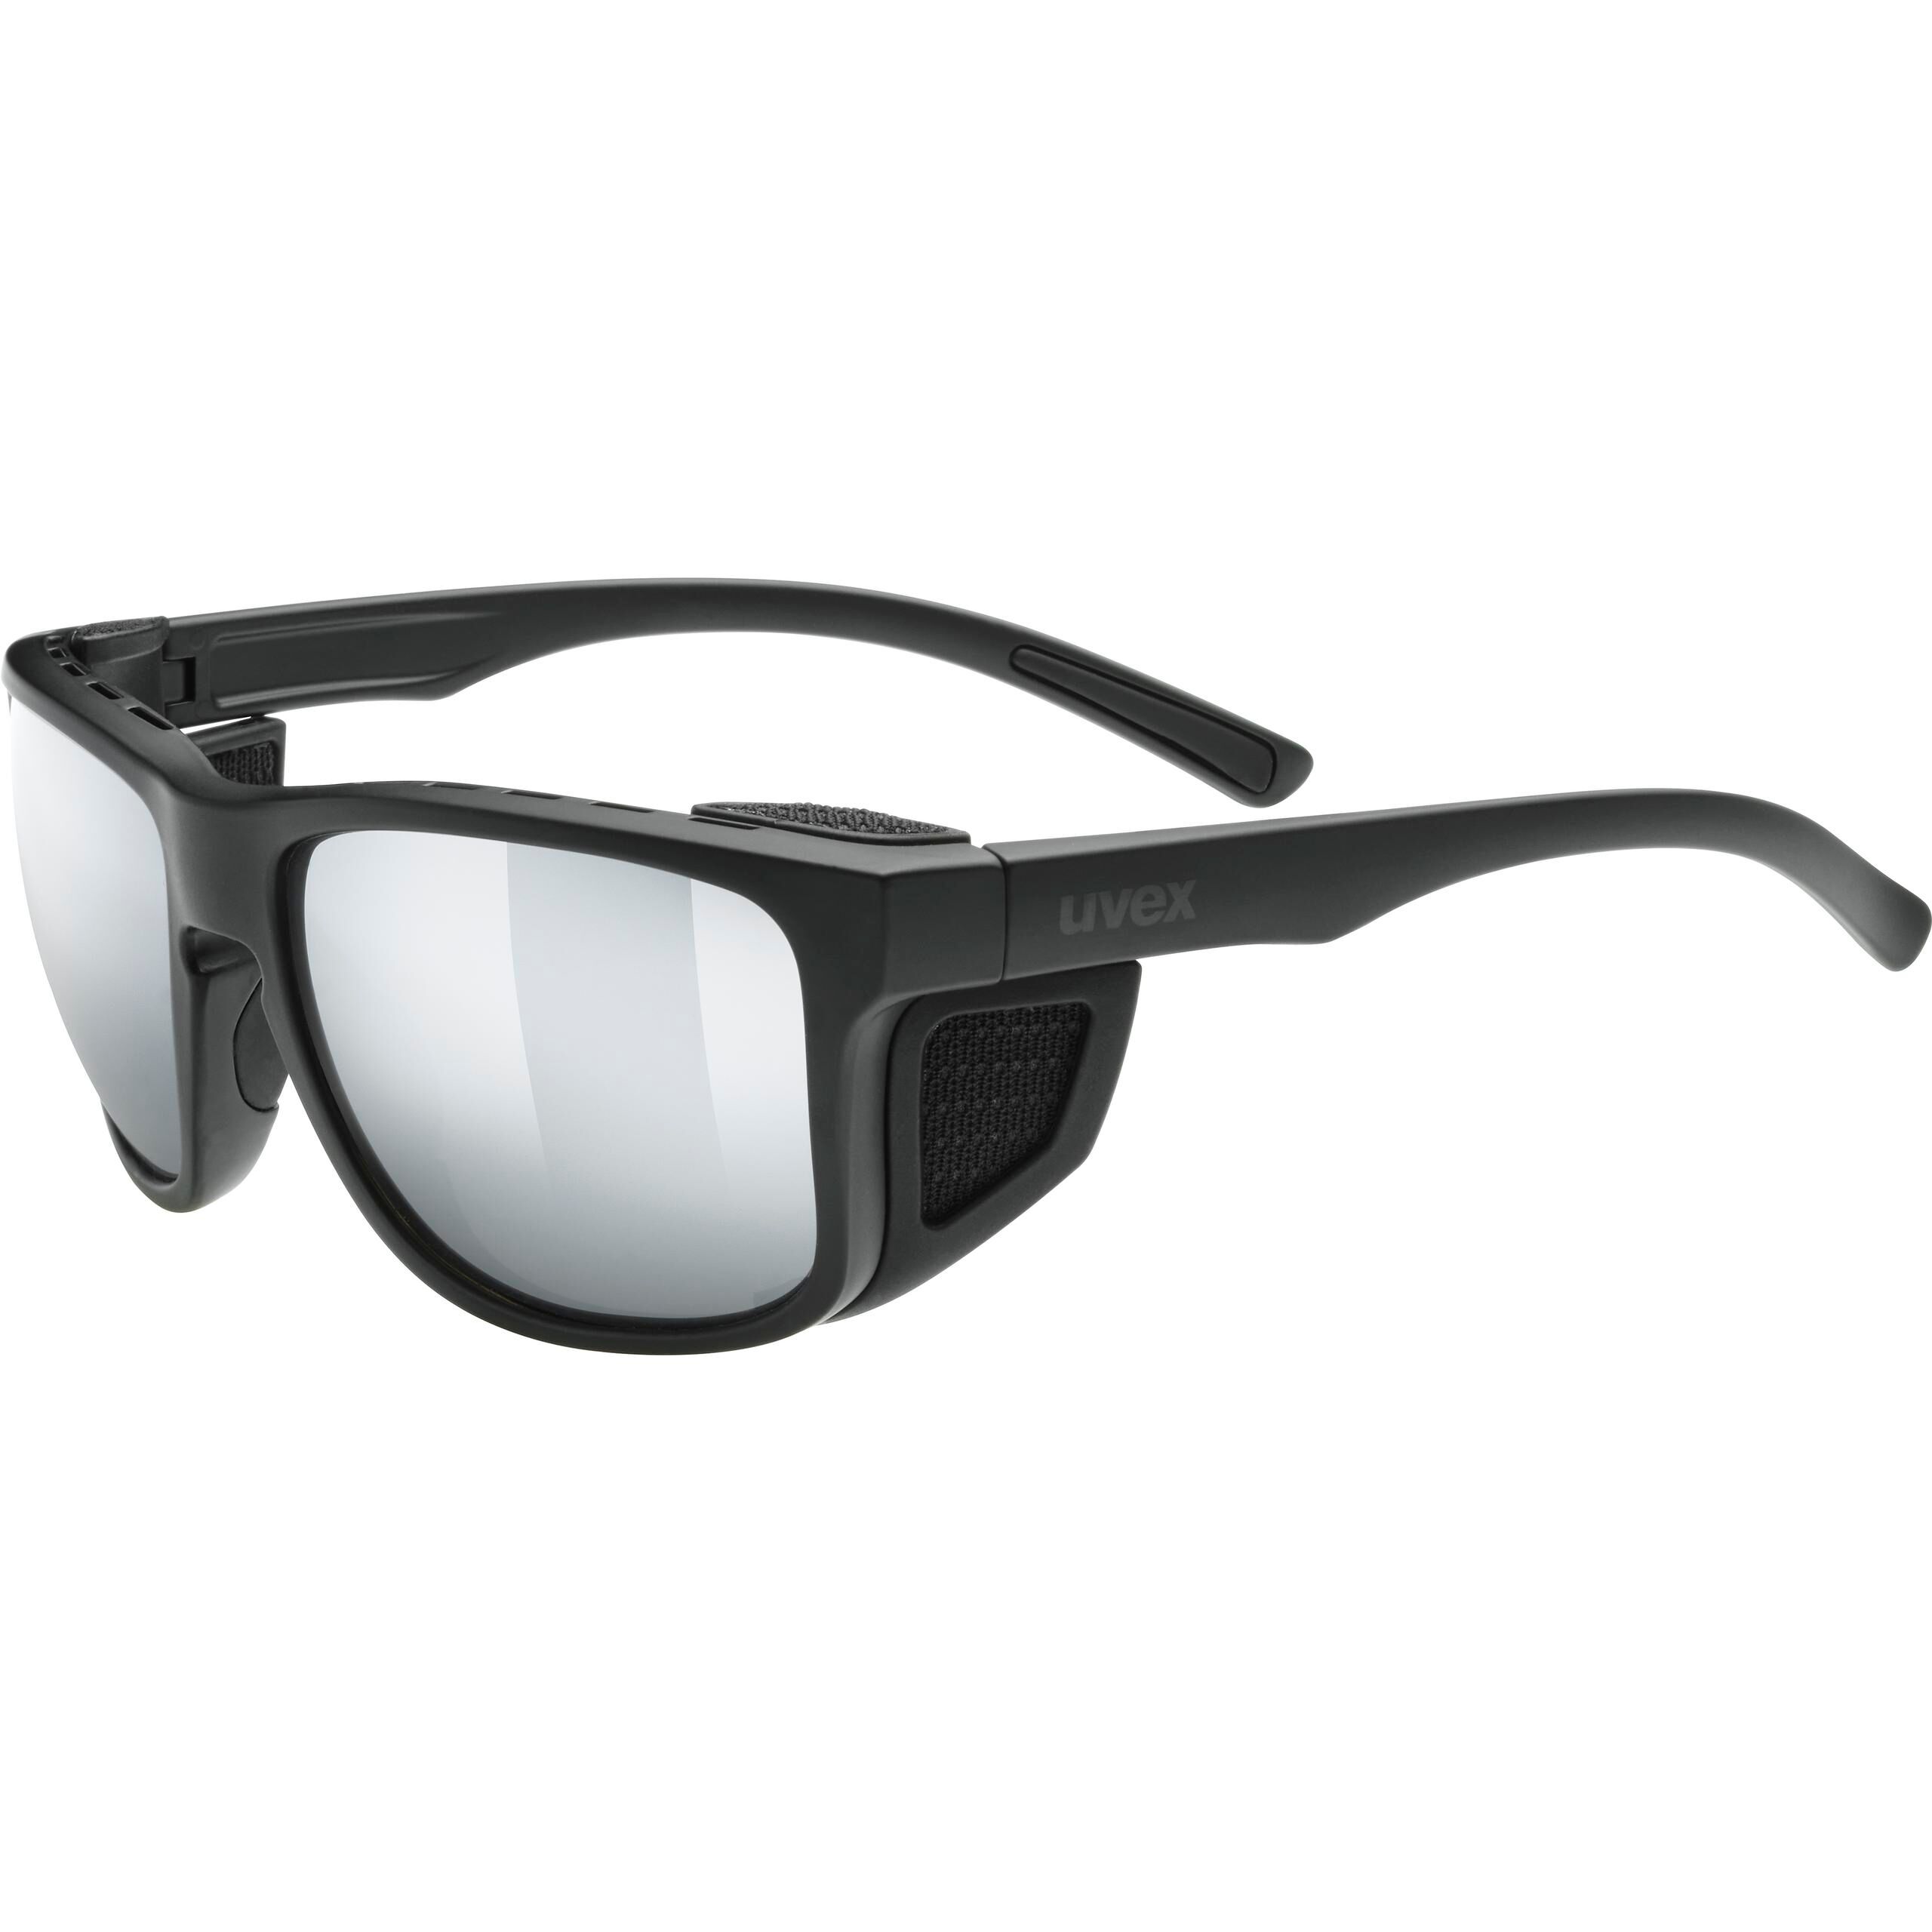 Uvex Sportstyle 312 - Cycling sunglasses